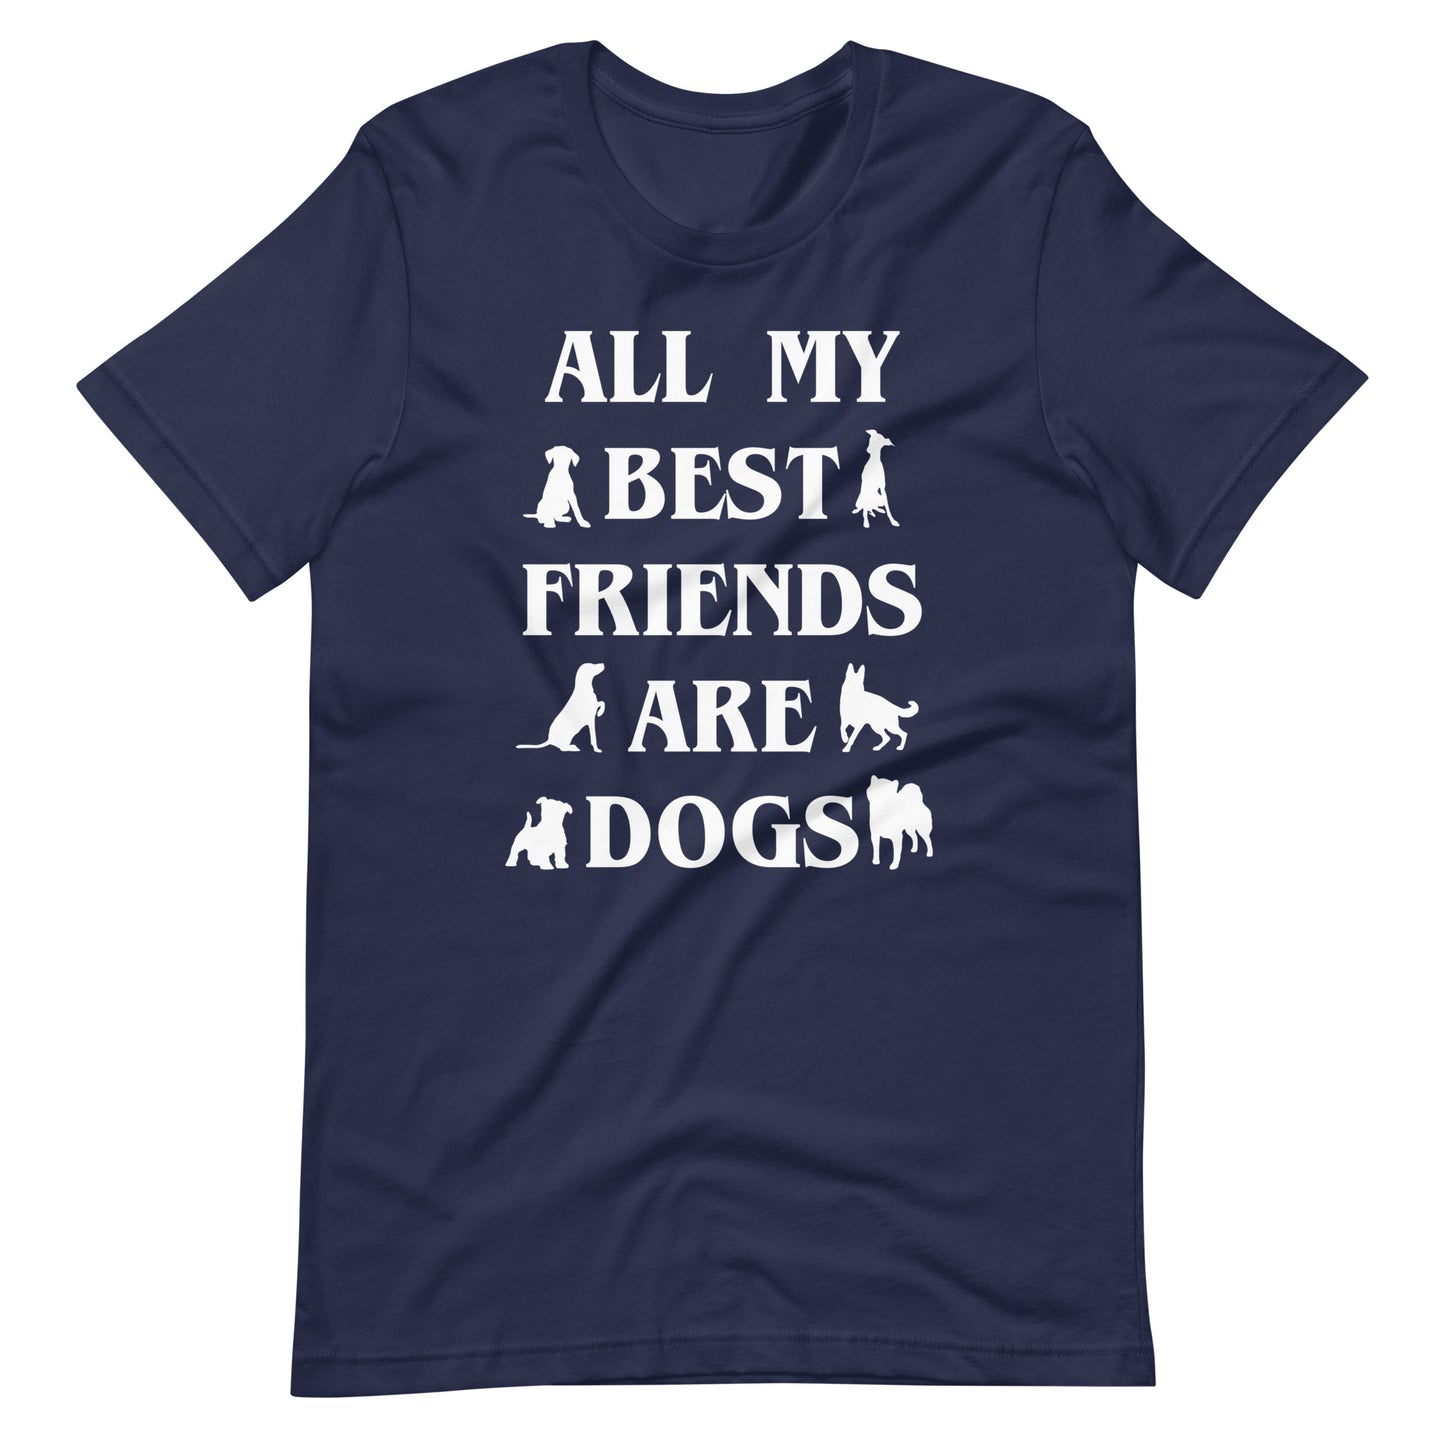 All My Best Friends are Dogs T-Shirt